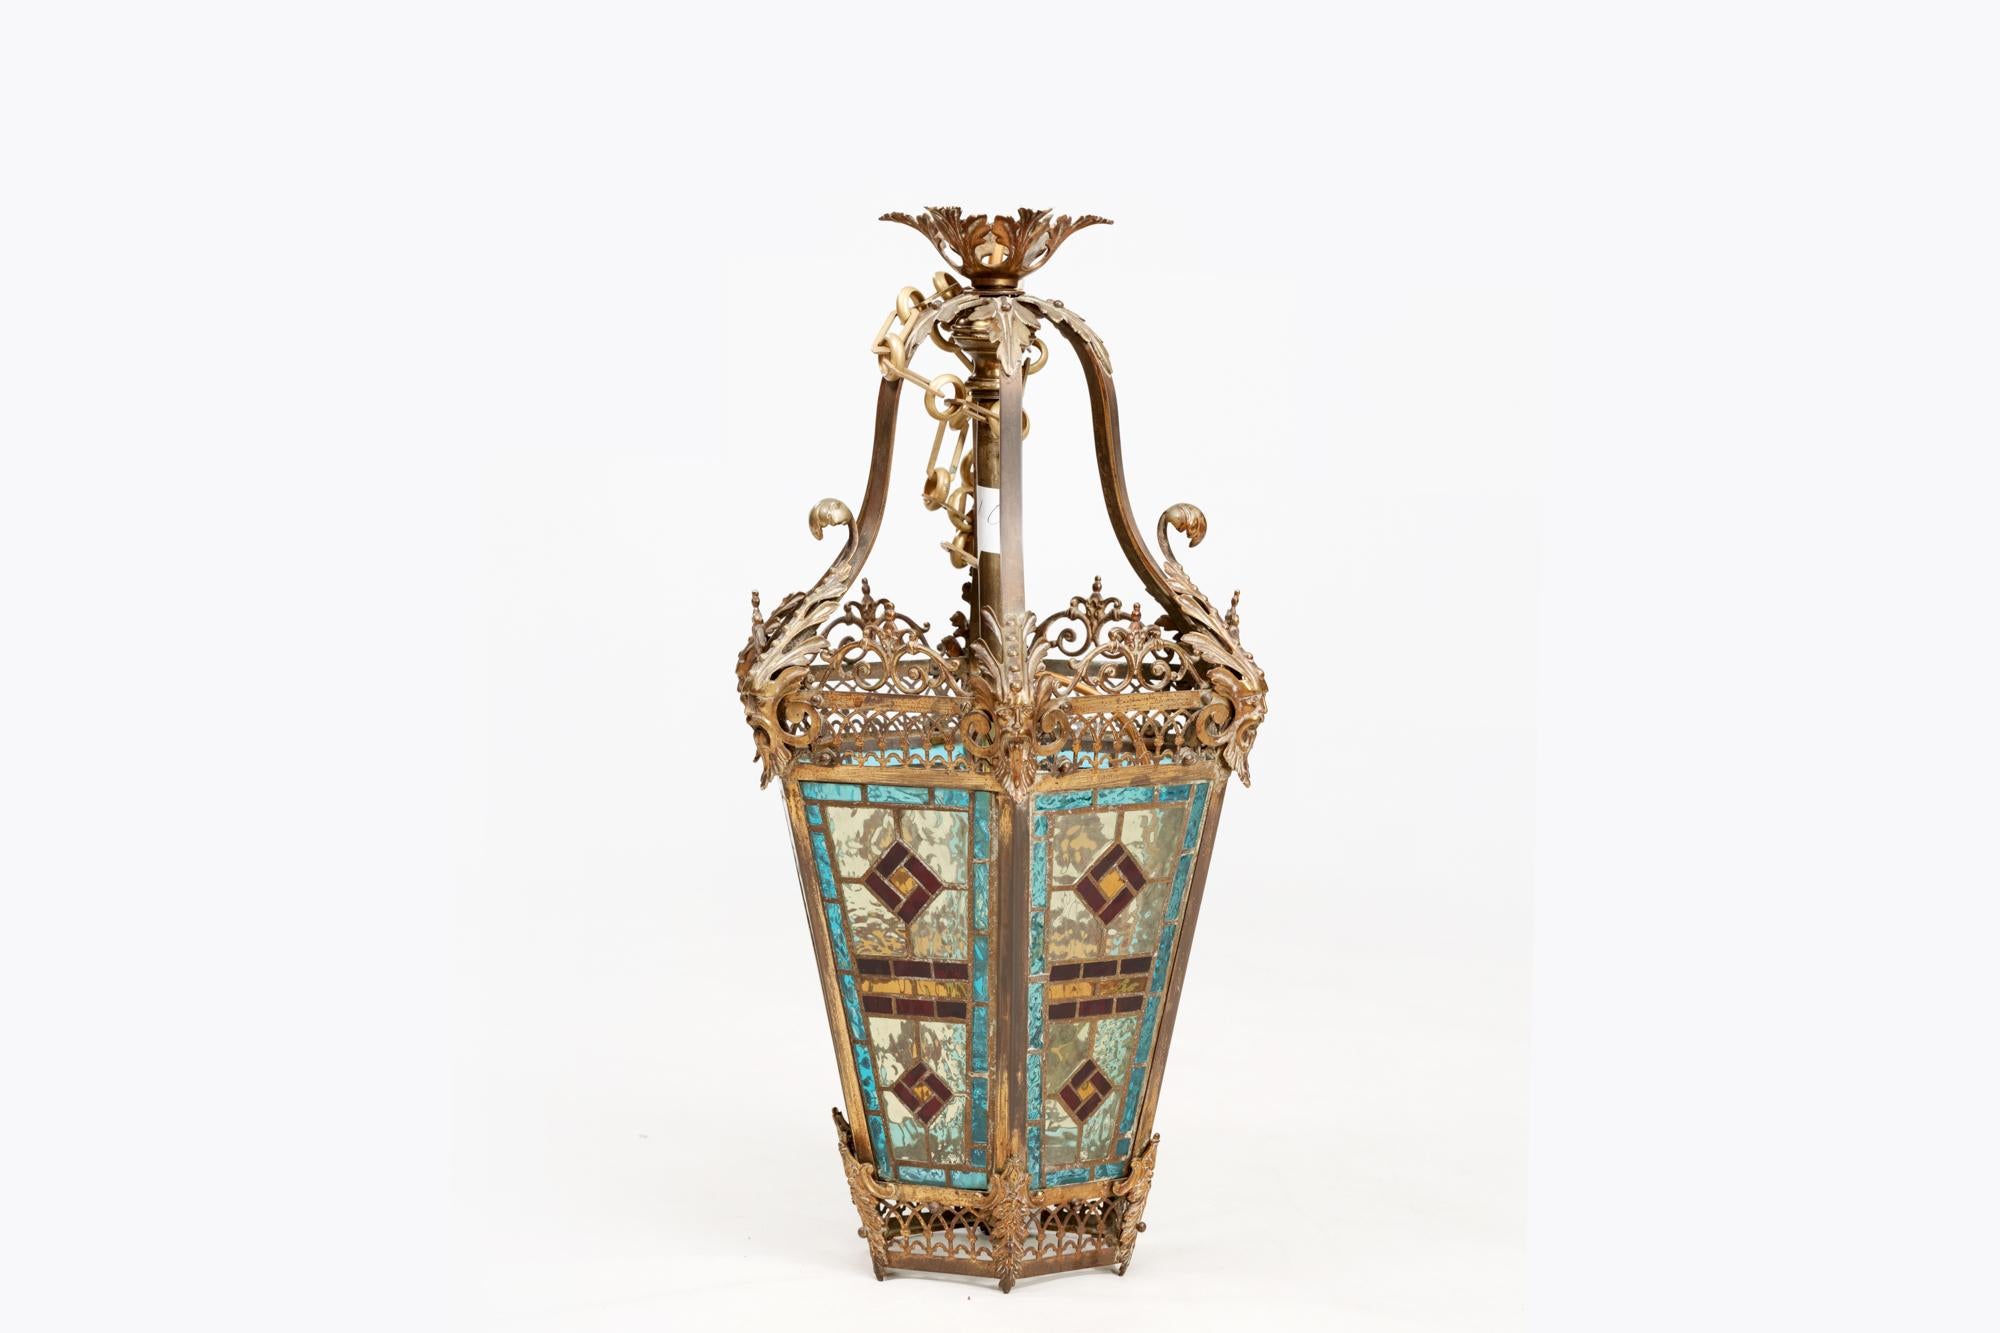 19th Century brass hall lantern with original stained glass panels. The frame with pierced brass gothic-style arches is complimented by bearded figureheads to the corners terminating in scrolled foliate detail.